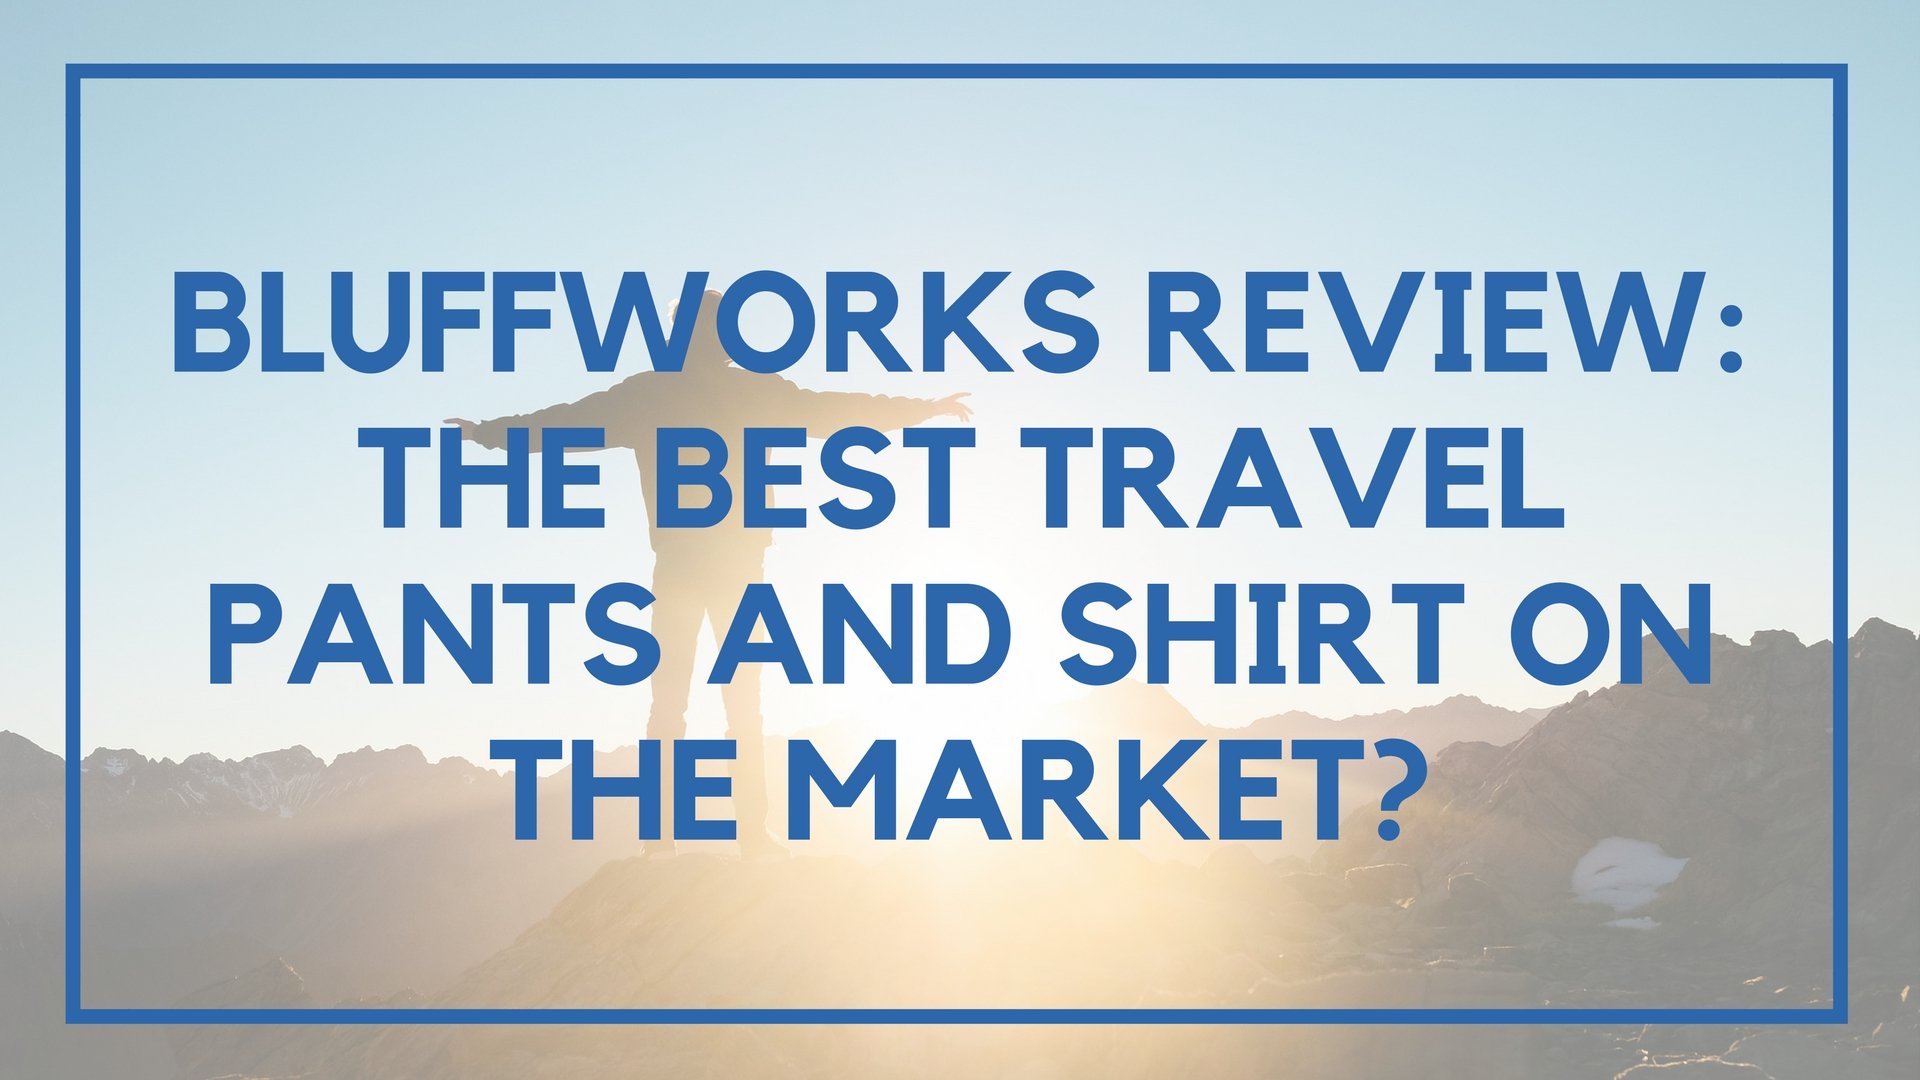 Bluffworks Review: The Best Travel Pants and Shirt On the Market?